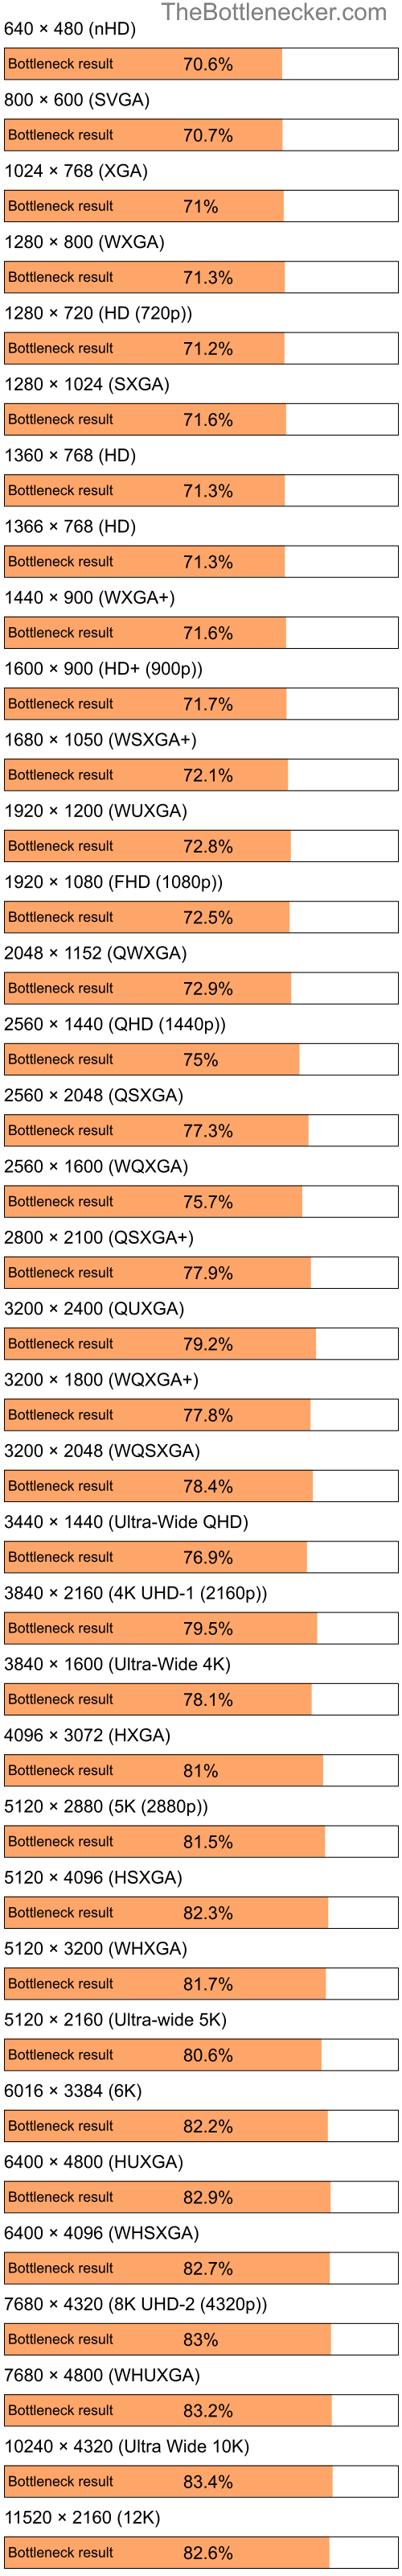 Bottleneck results by resolution for Intel Pentium 4 and NVIDIA GeForce 6700 XL in Graphic Card Intense Tasks